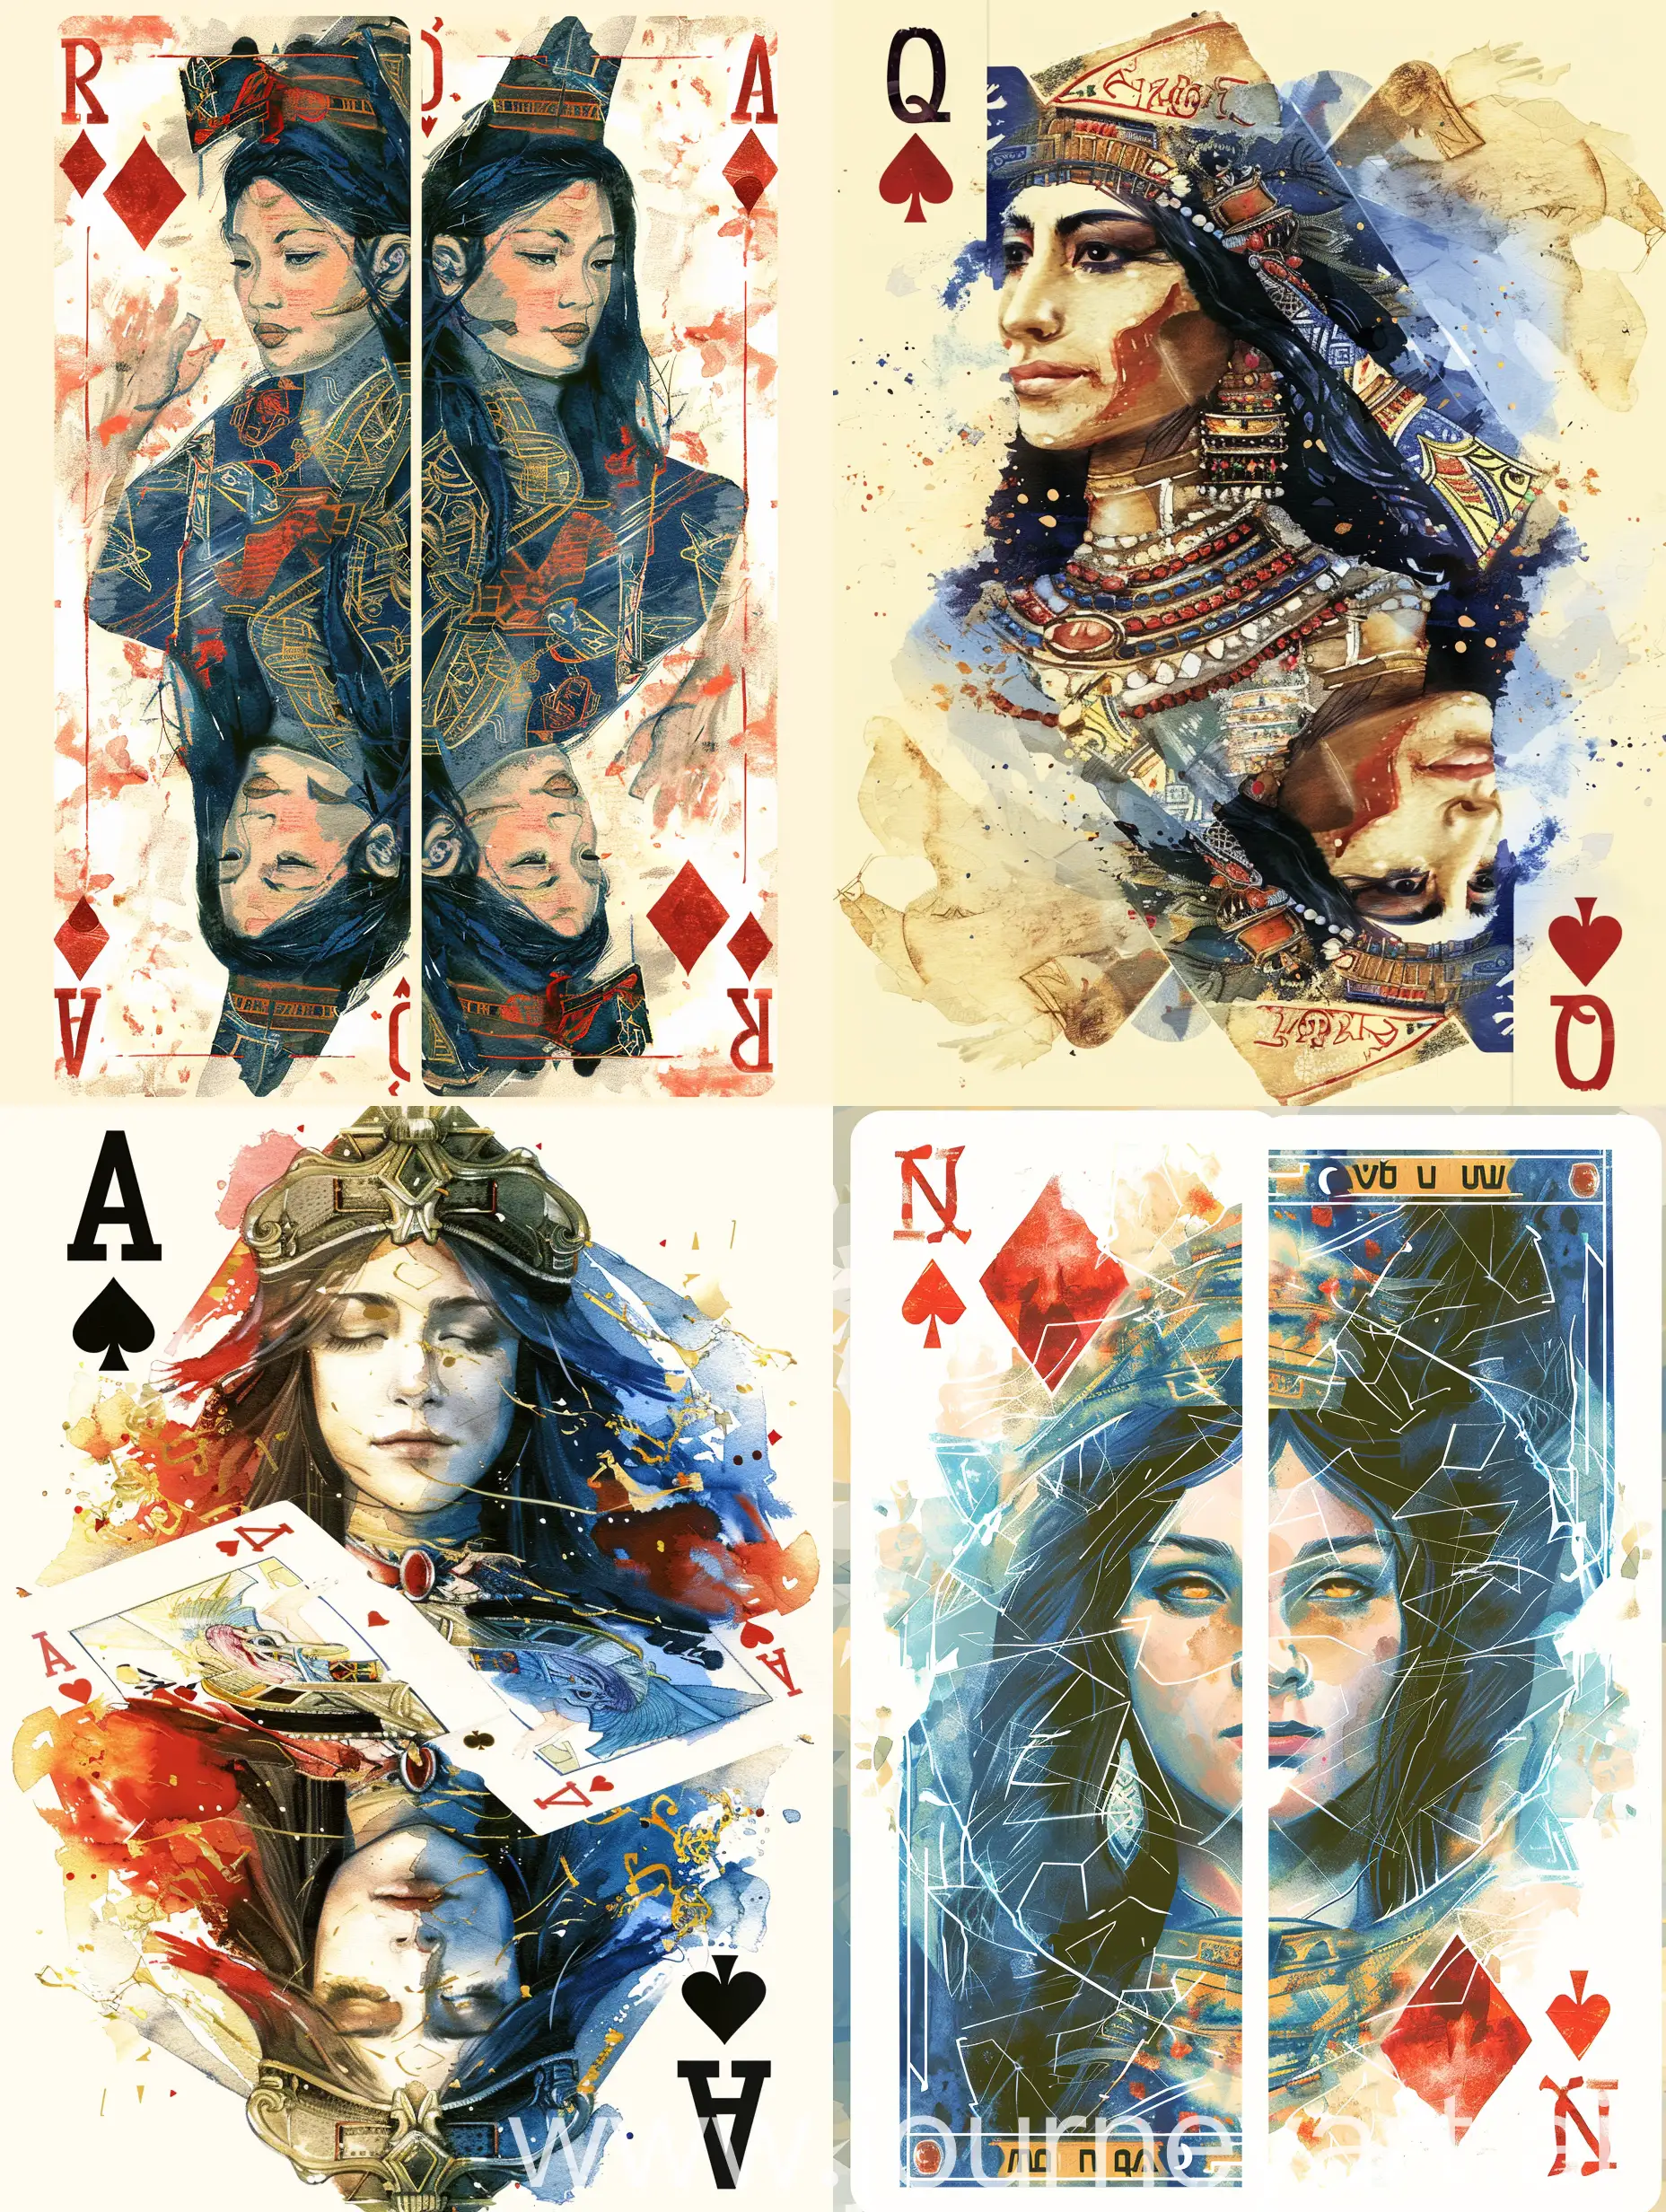 playing card cover design, queen of the ancient Sumerian civilization theme, reflected vertically, watercolor, Victor Ngai style